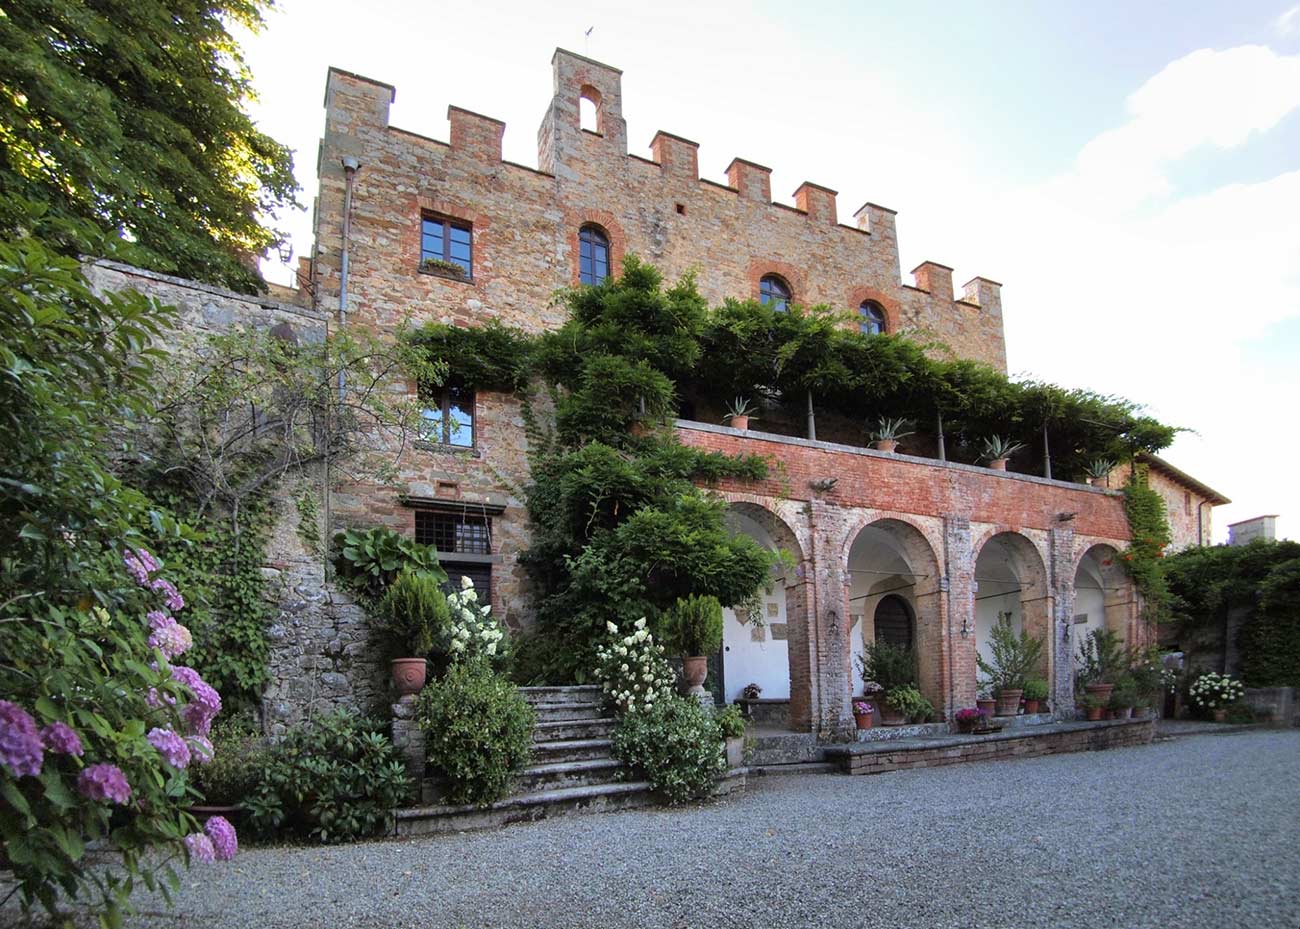 A real large Tuscan villa inside the Castle. Italy Villas.